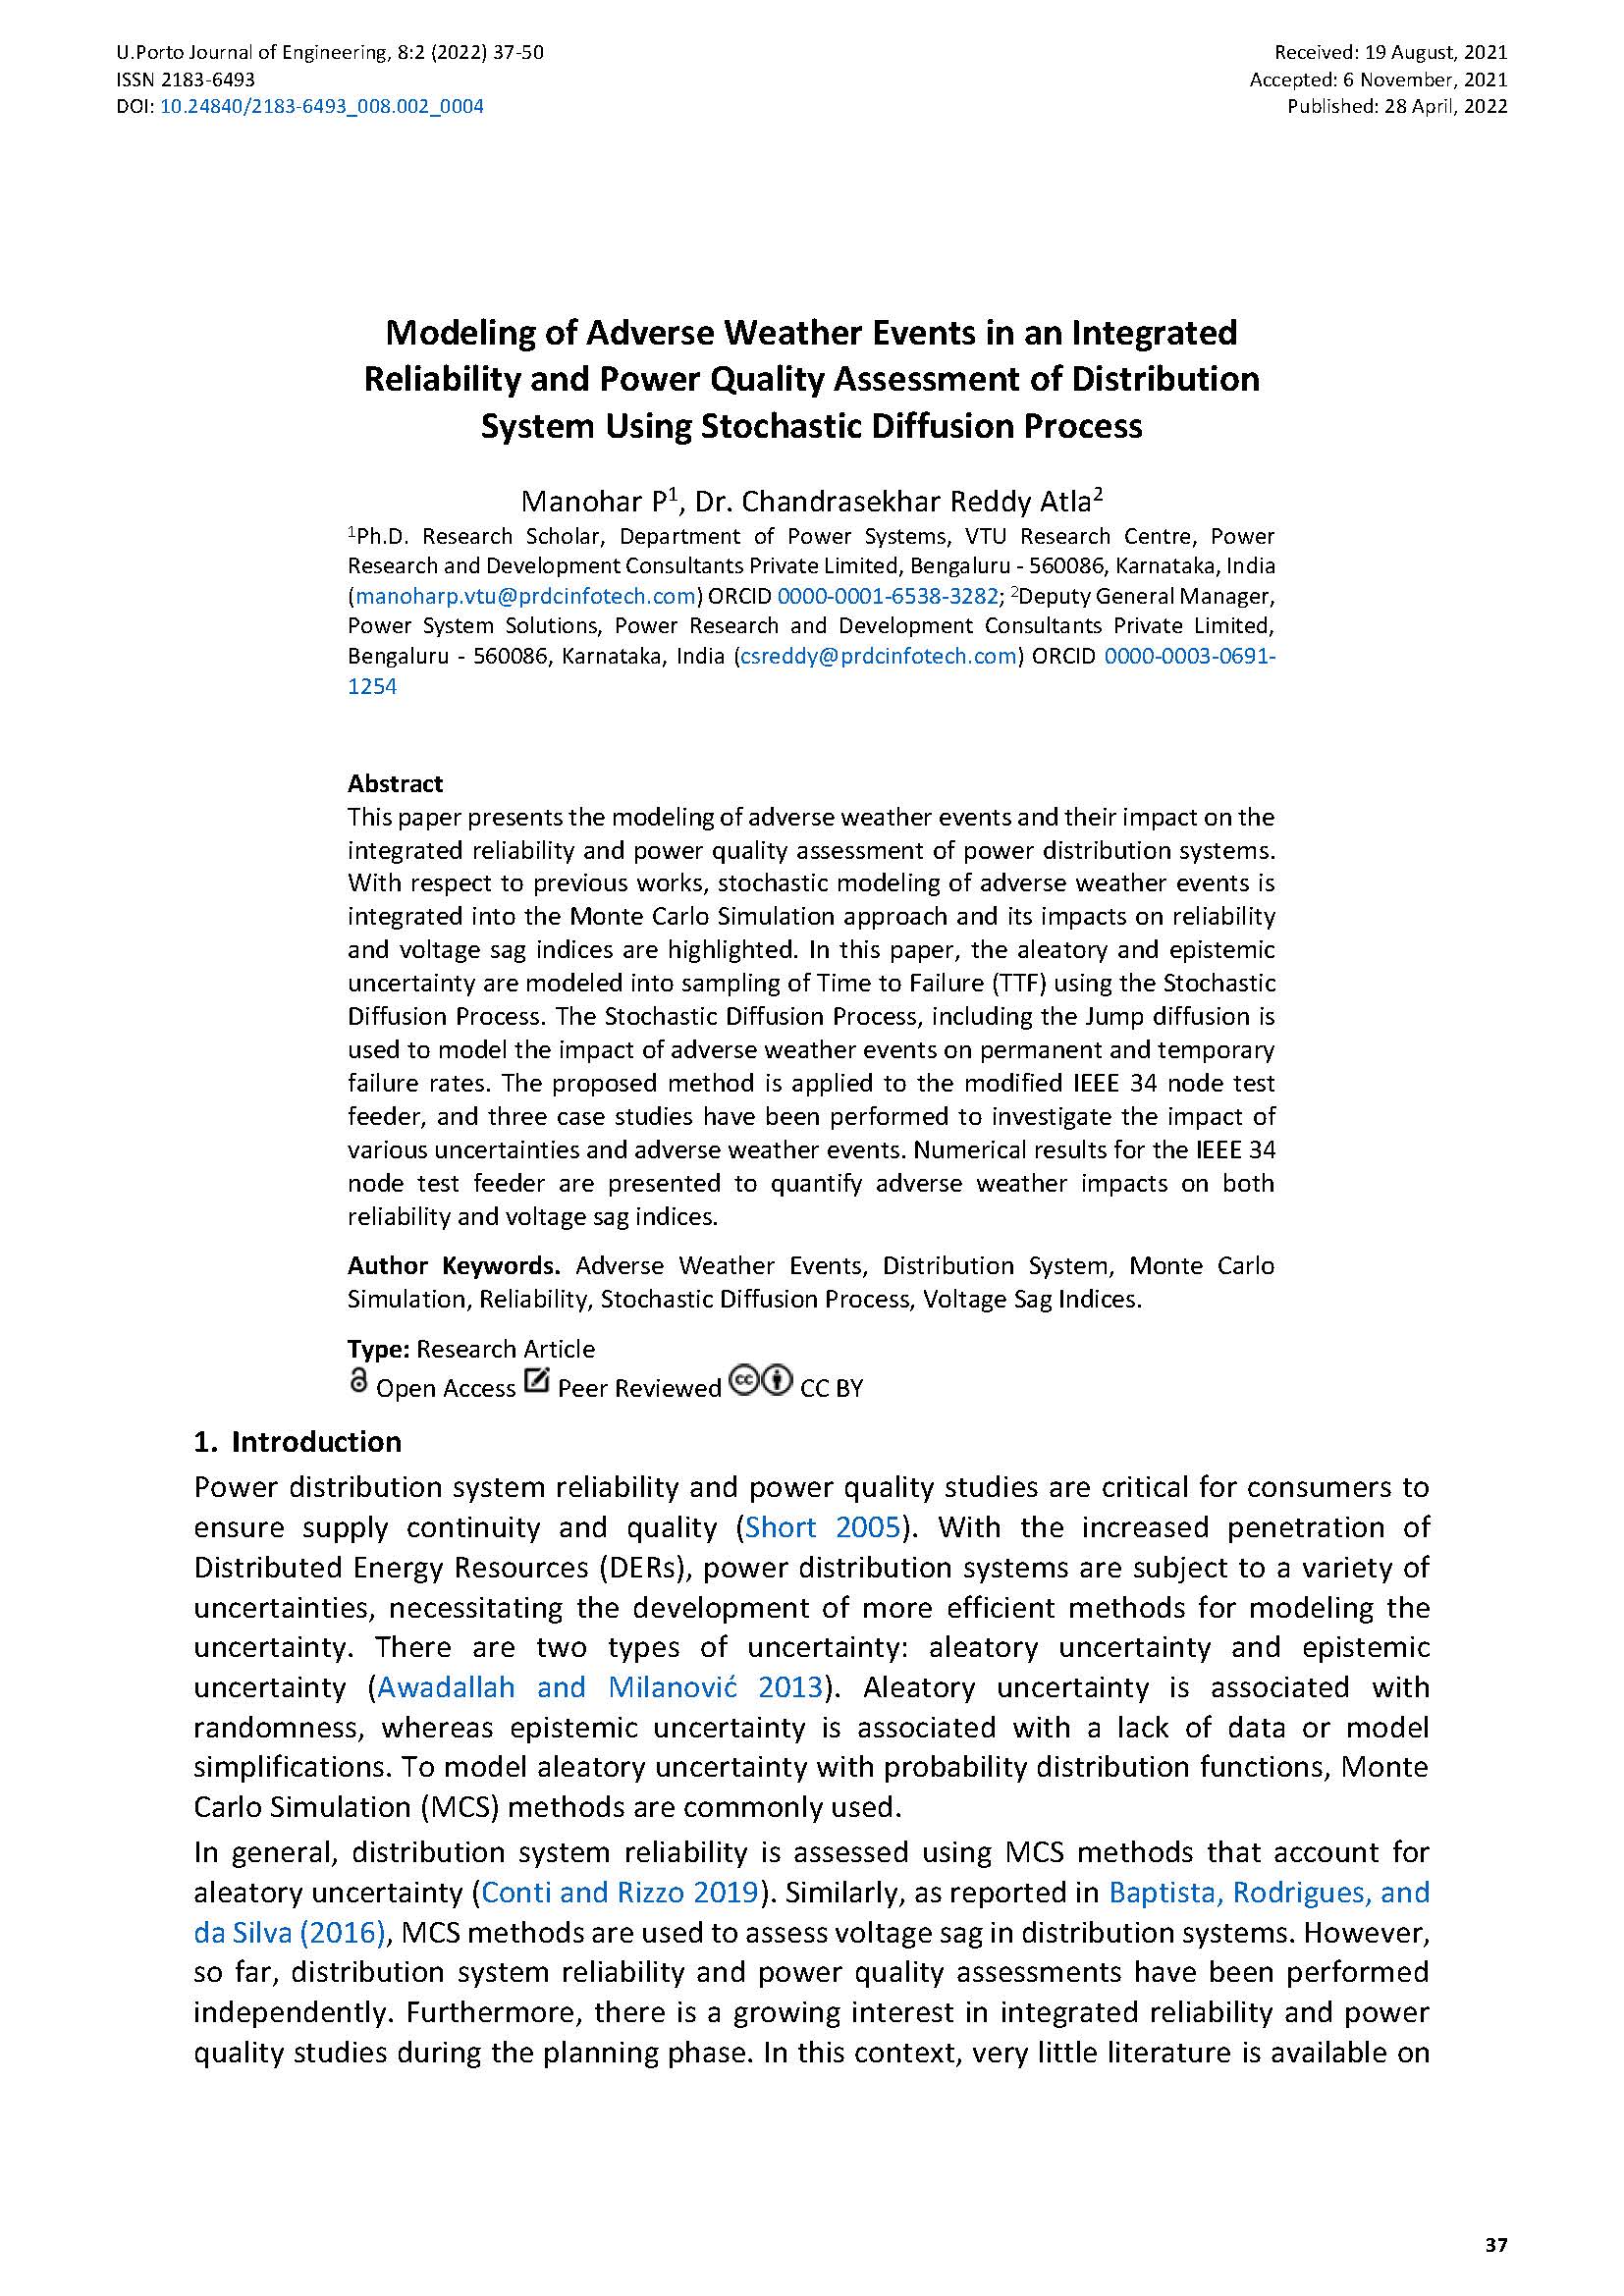 Modeling of Adverse Weather Events in an Integrated Reliability and Power Quality Assessment of Distribution System Using Stochastic Diffusion Process